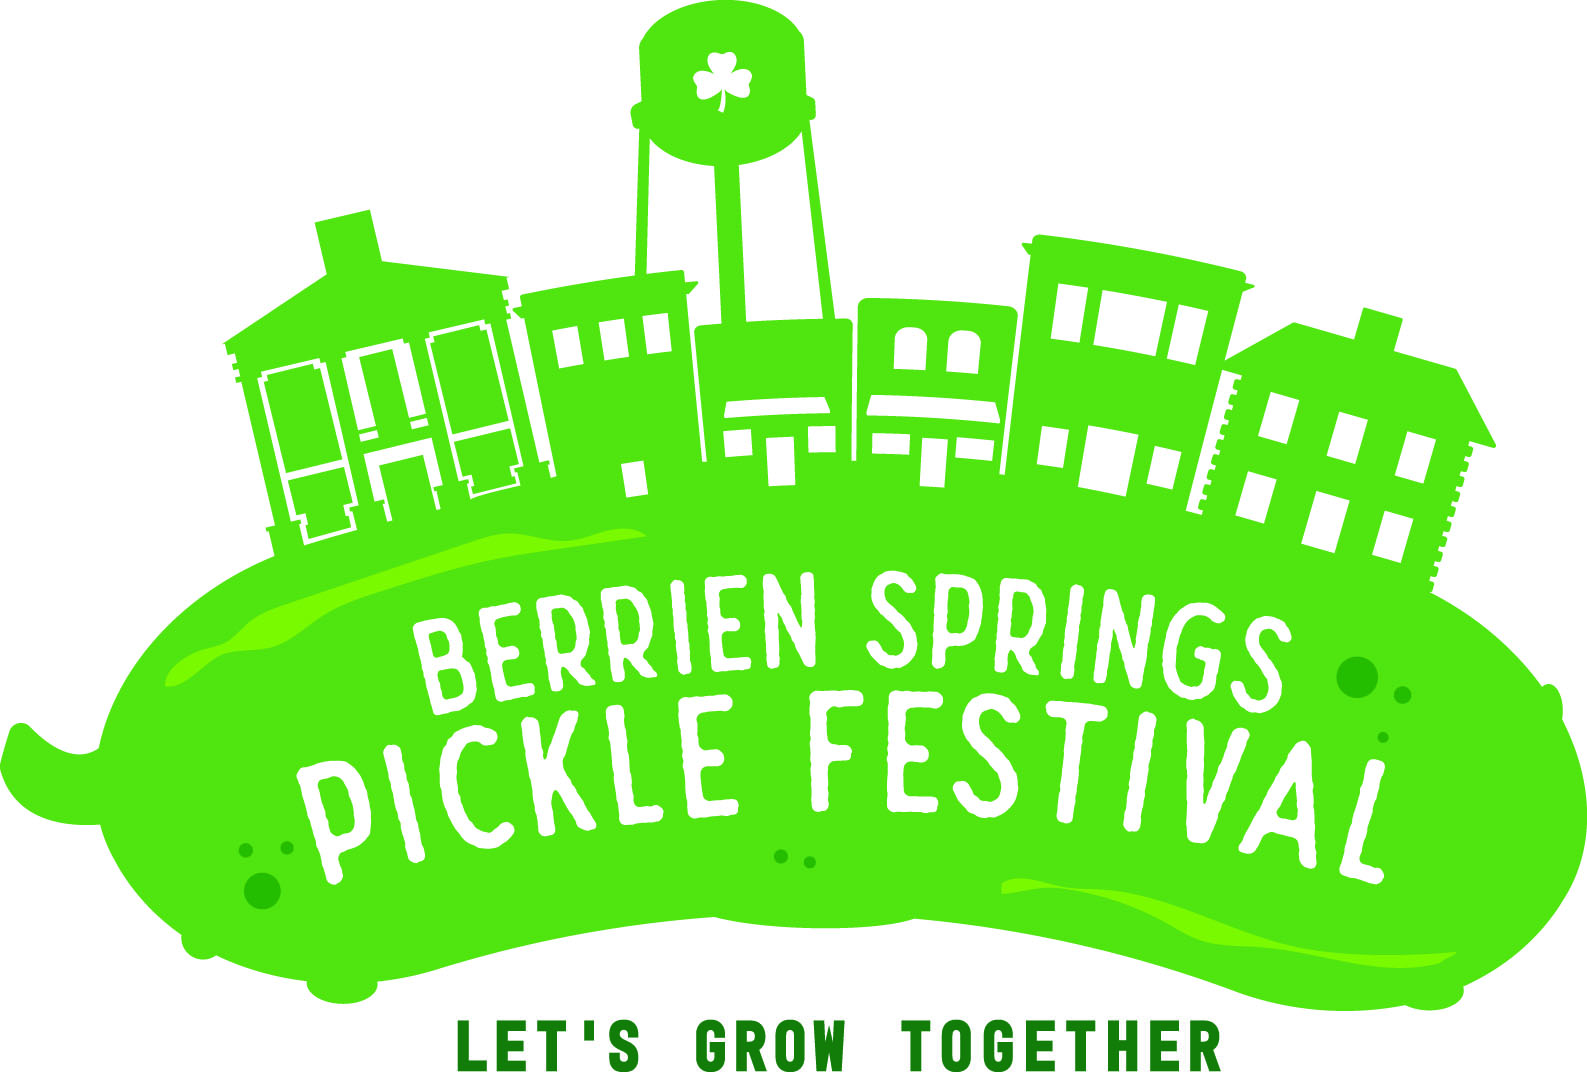 Berrien Springs' Pickle Festival Is Back And It's A Big Dill